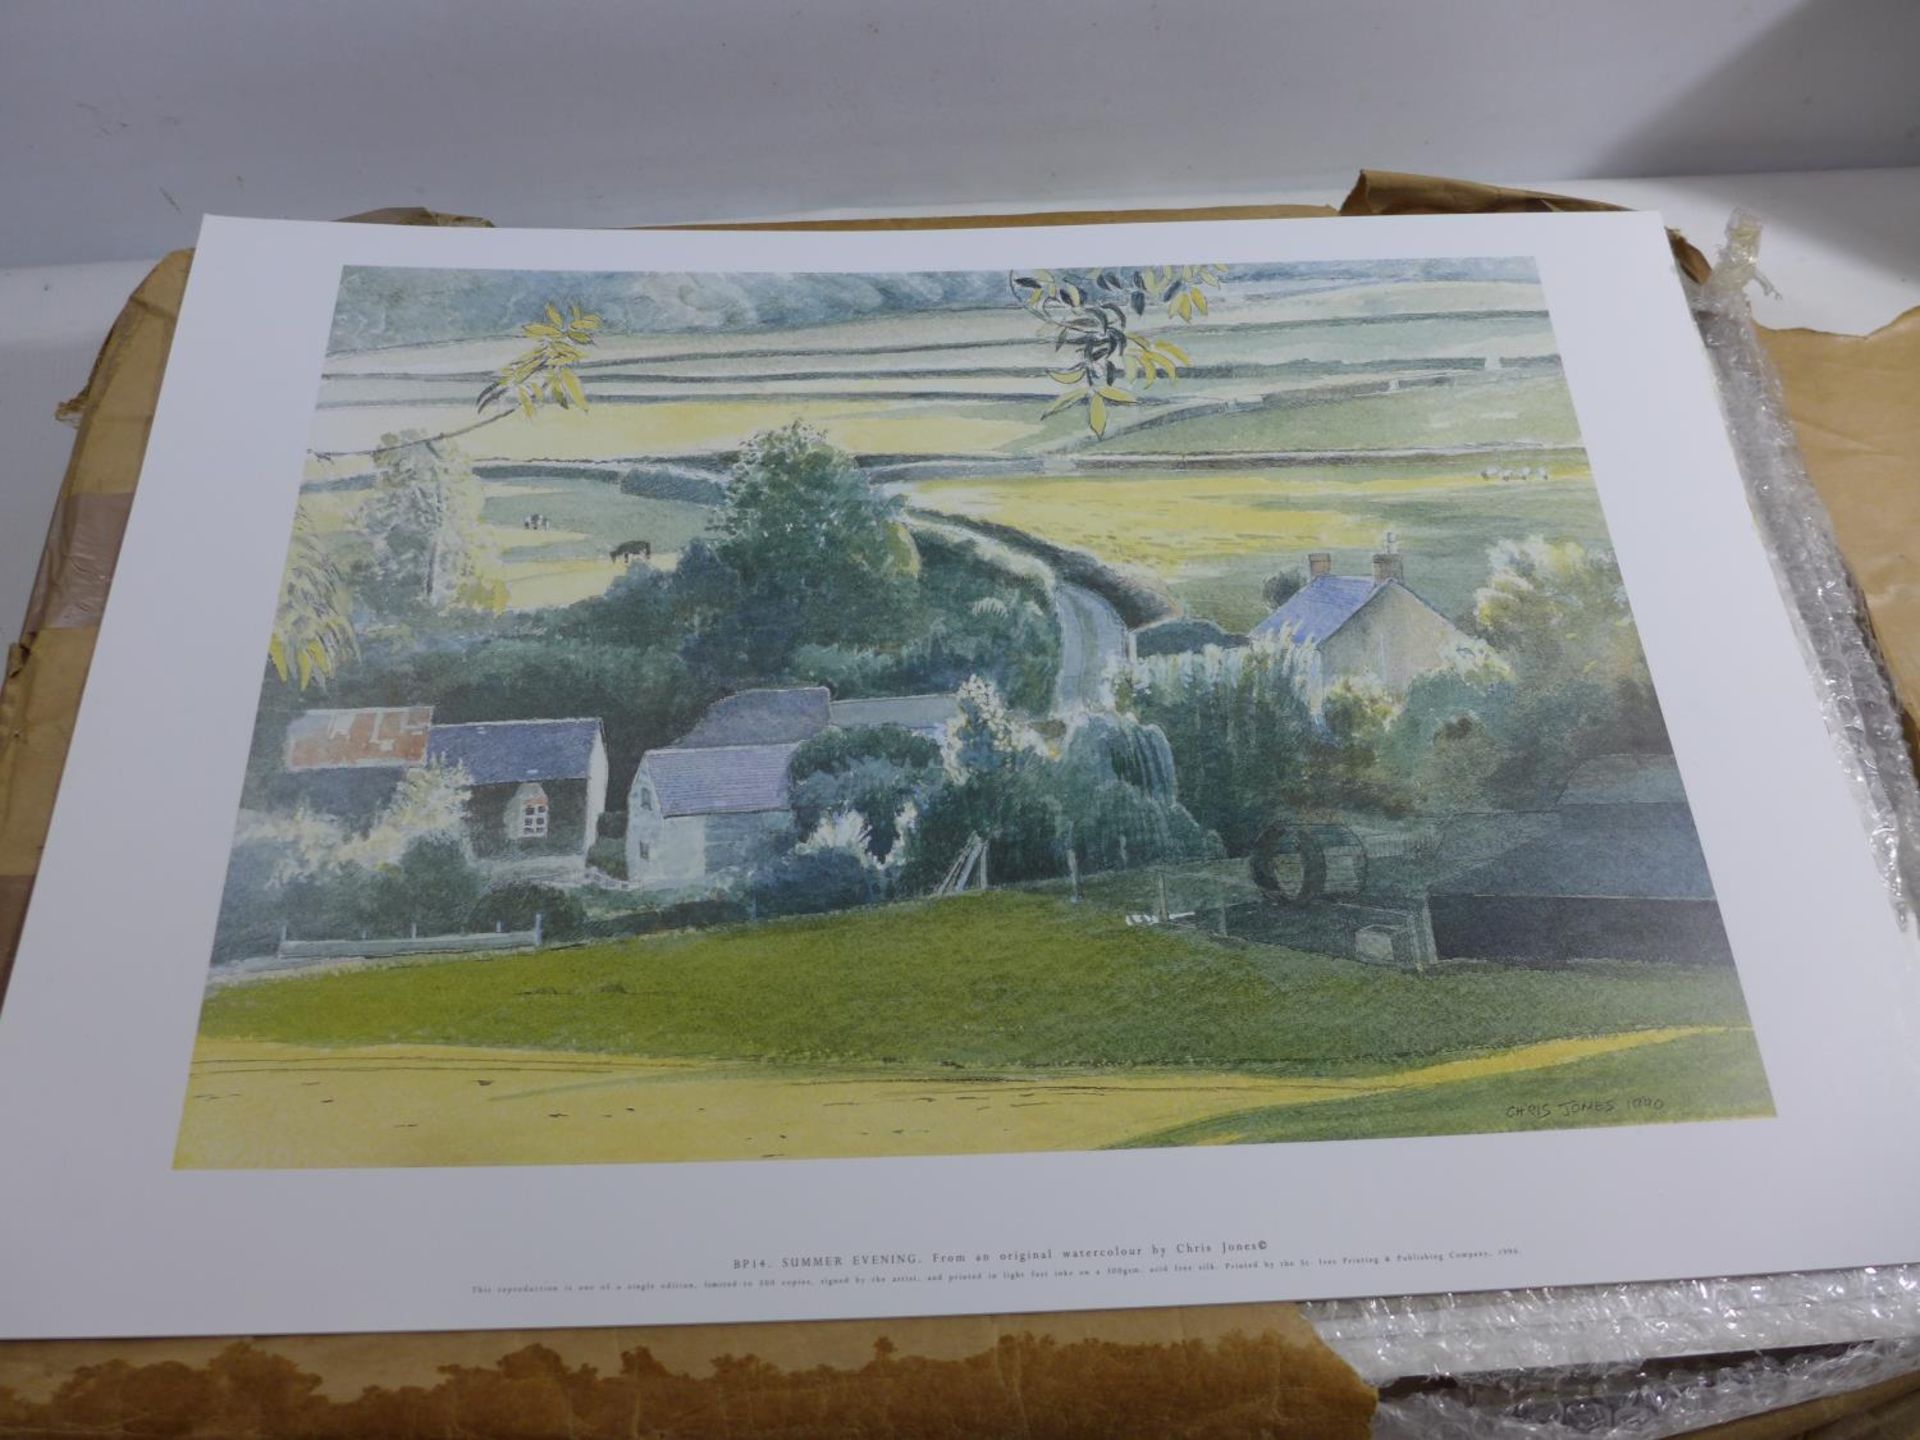 CHRIS JONES (BRITISH 20TH CENTURY) 'SUMMER EVENING', A COLLECTION OF APPROX 300 COLOURED PRINTS FROM